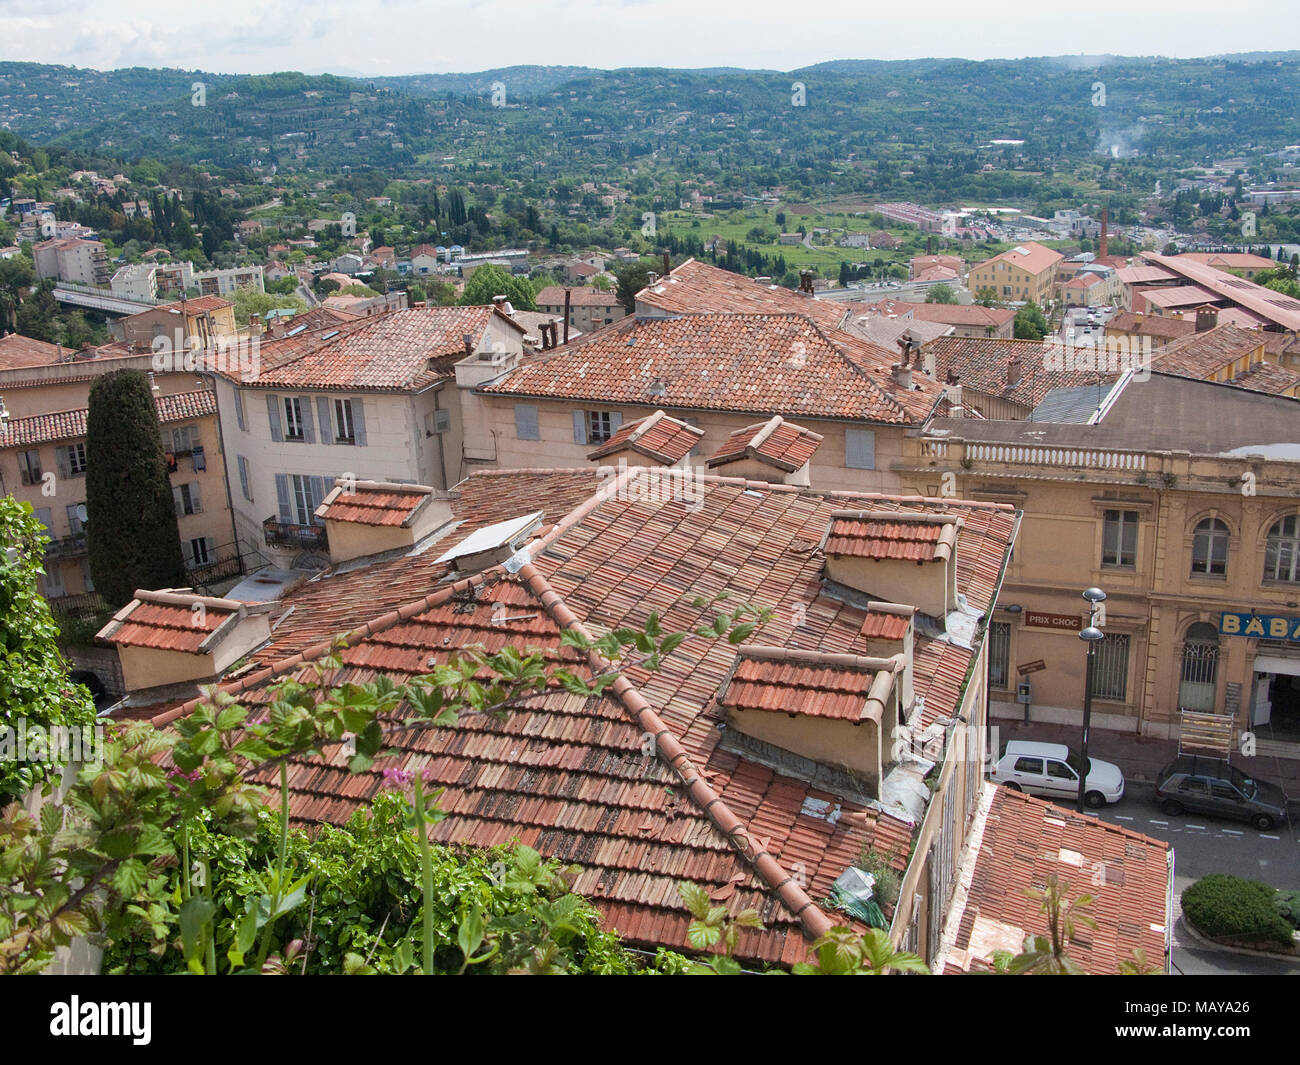 View over the roofs of the old town of Grasse, Alpes-Maritimes, South France, France, Europe Stock Photo